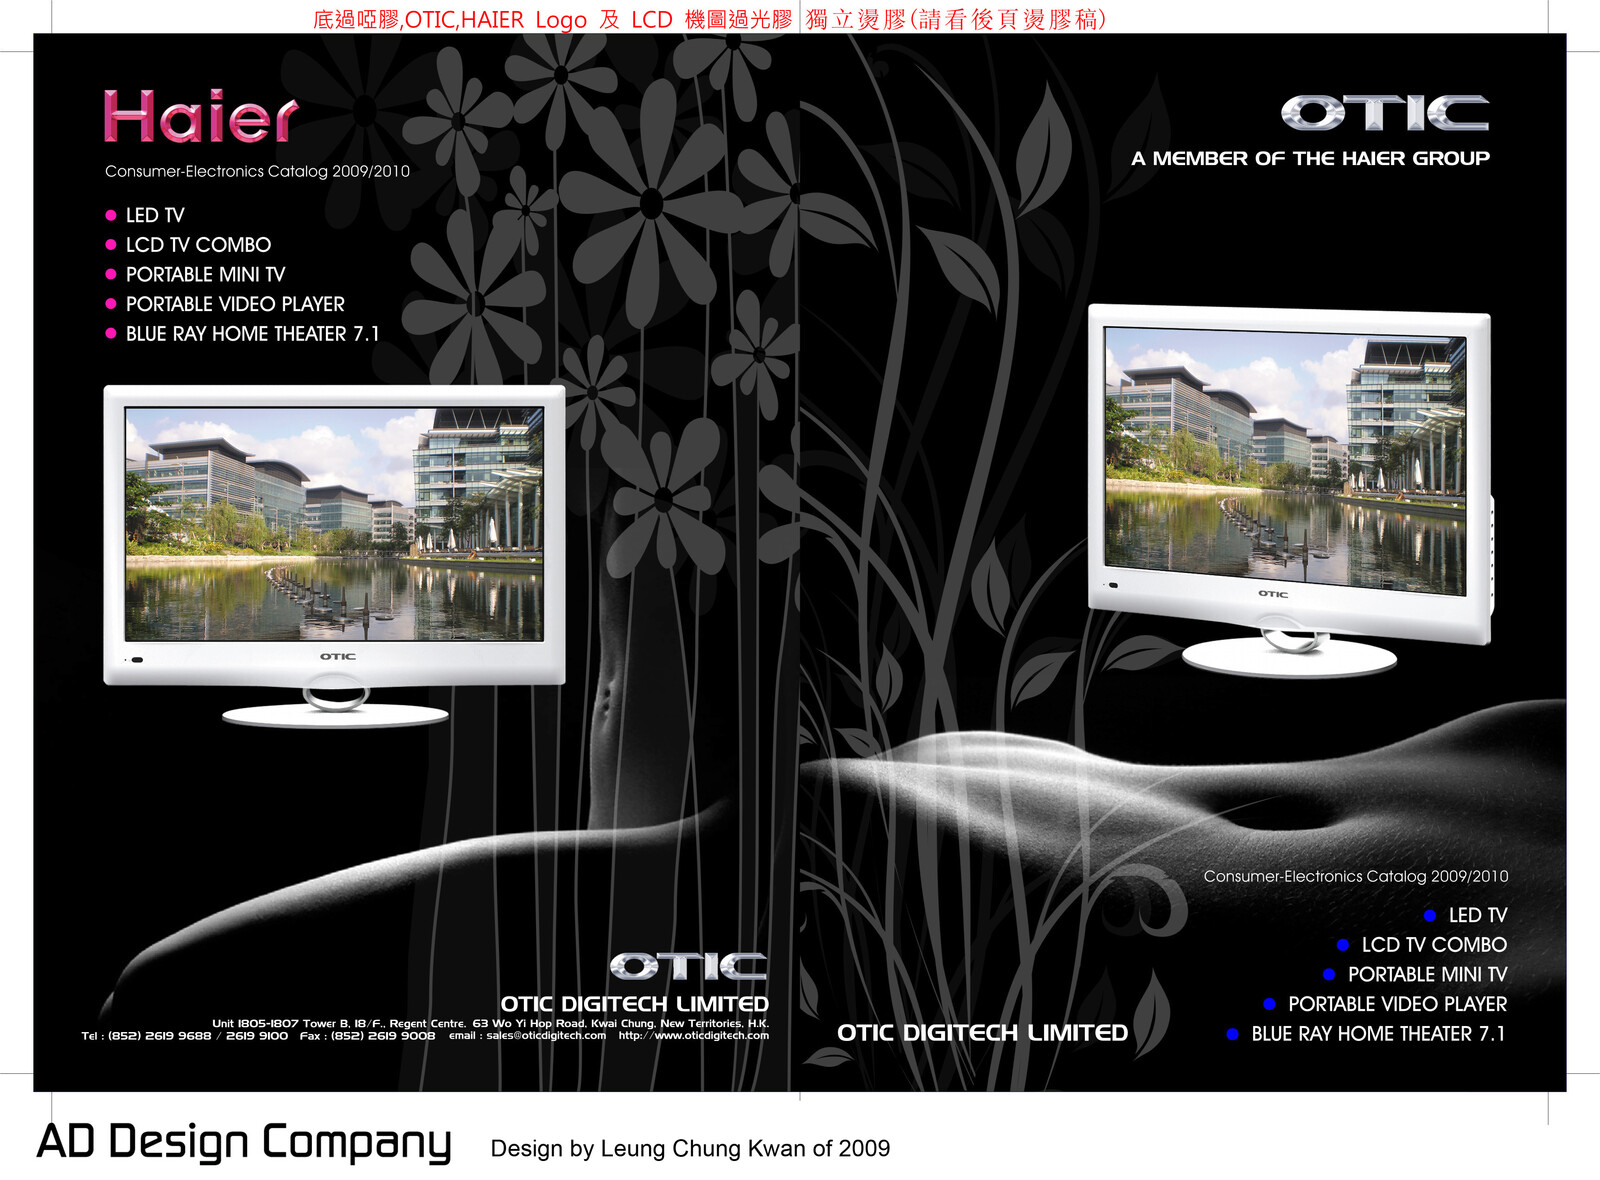 💎 Booklet Catalogue Cover | Design by Leung Chung Kwan on 2009 💎
Brand Name︰Haier / OTIC | Client︰OTIC Limited